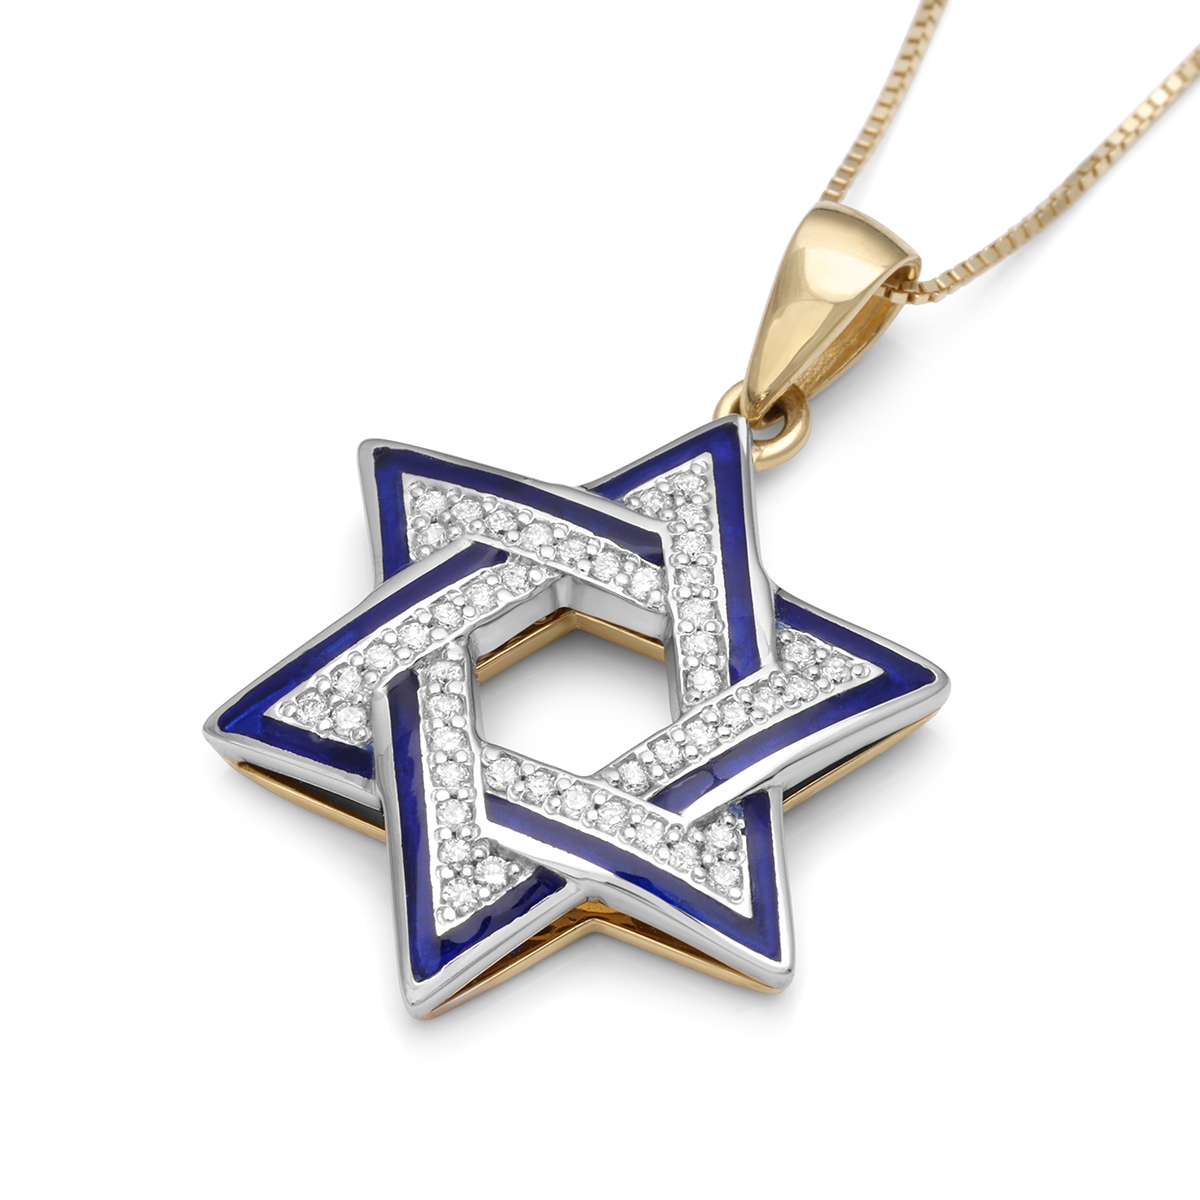 Two-Toned 14K Gold Star of David Pendant Necklace With Blue Enamel and White Diamonds - 1